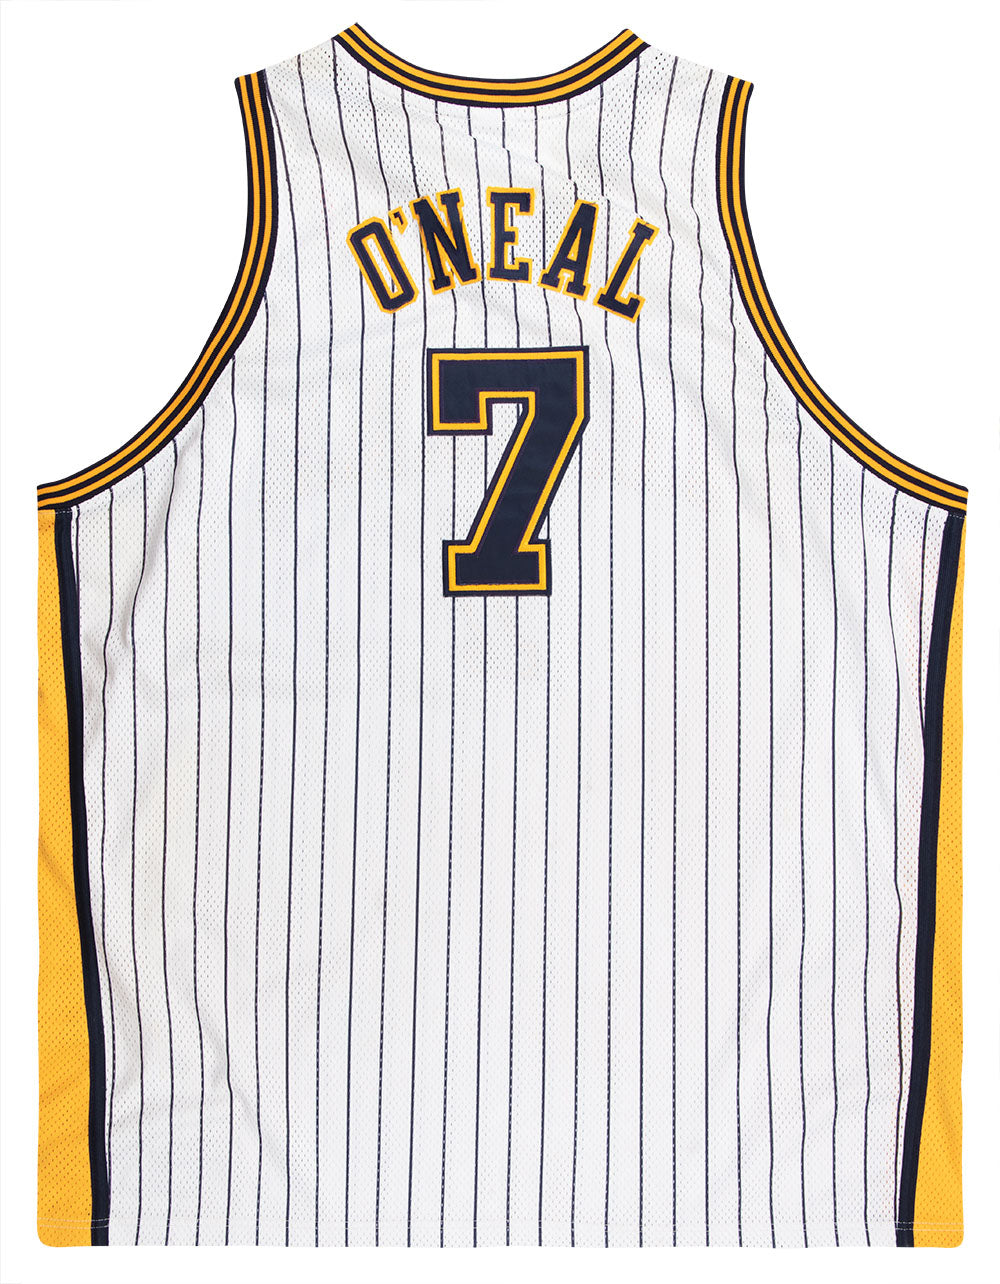 2001-05 AUTHENTIC INDIANA PACERS O'NEAL #7 REEBOK JERSEY (HOME) 3XL